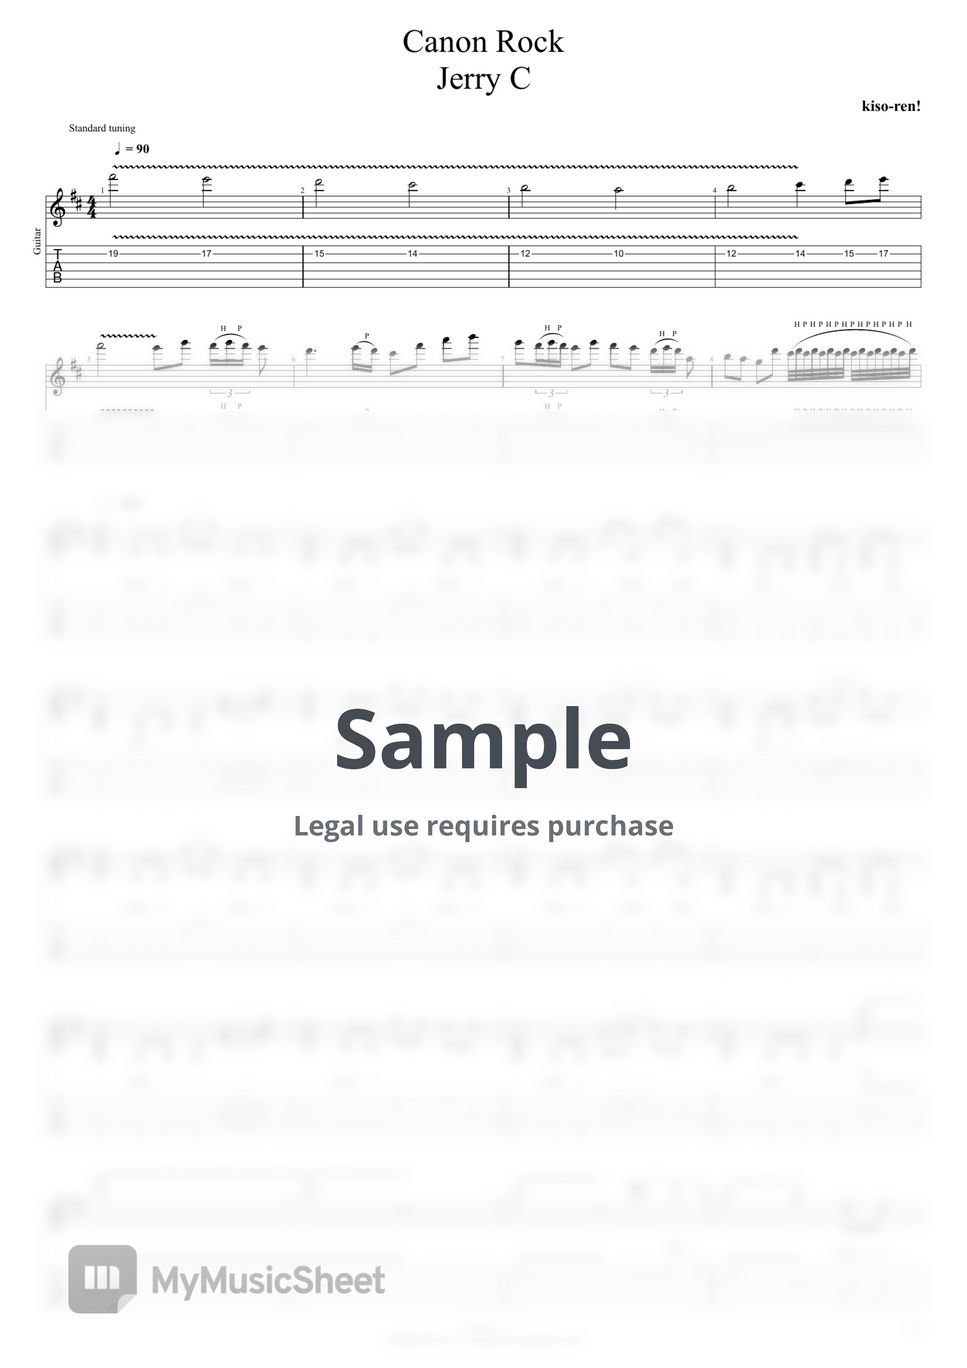 JerryC - カノンロック Canon Rock Full Guitar Score TAB  JerryC (TAB PDF & Guitar Pro files.（GPX）) by Technical Guitar